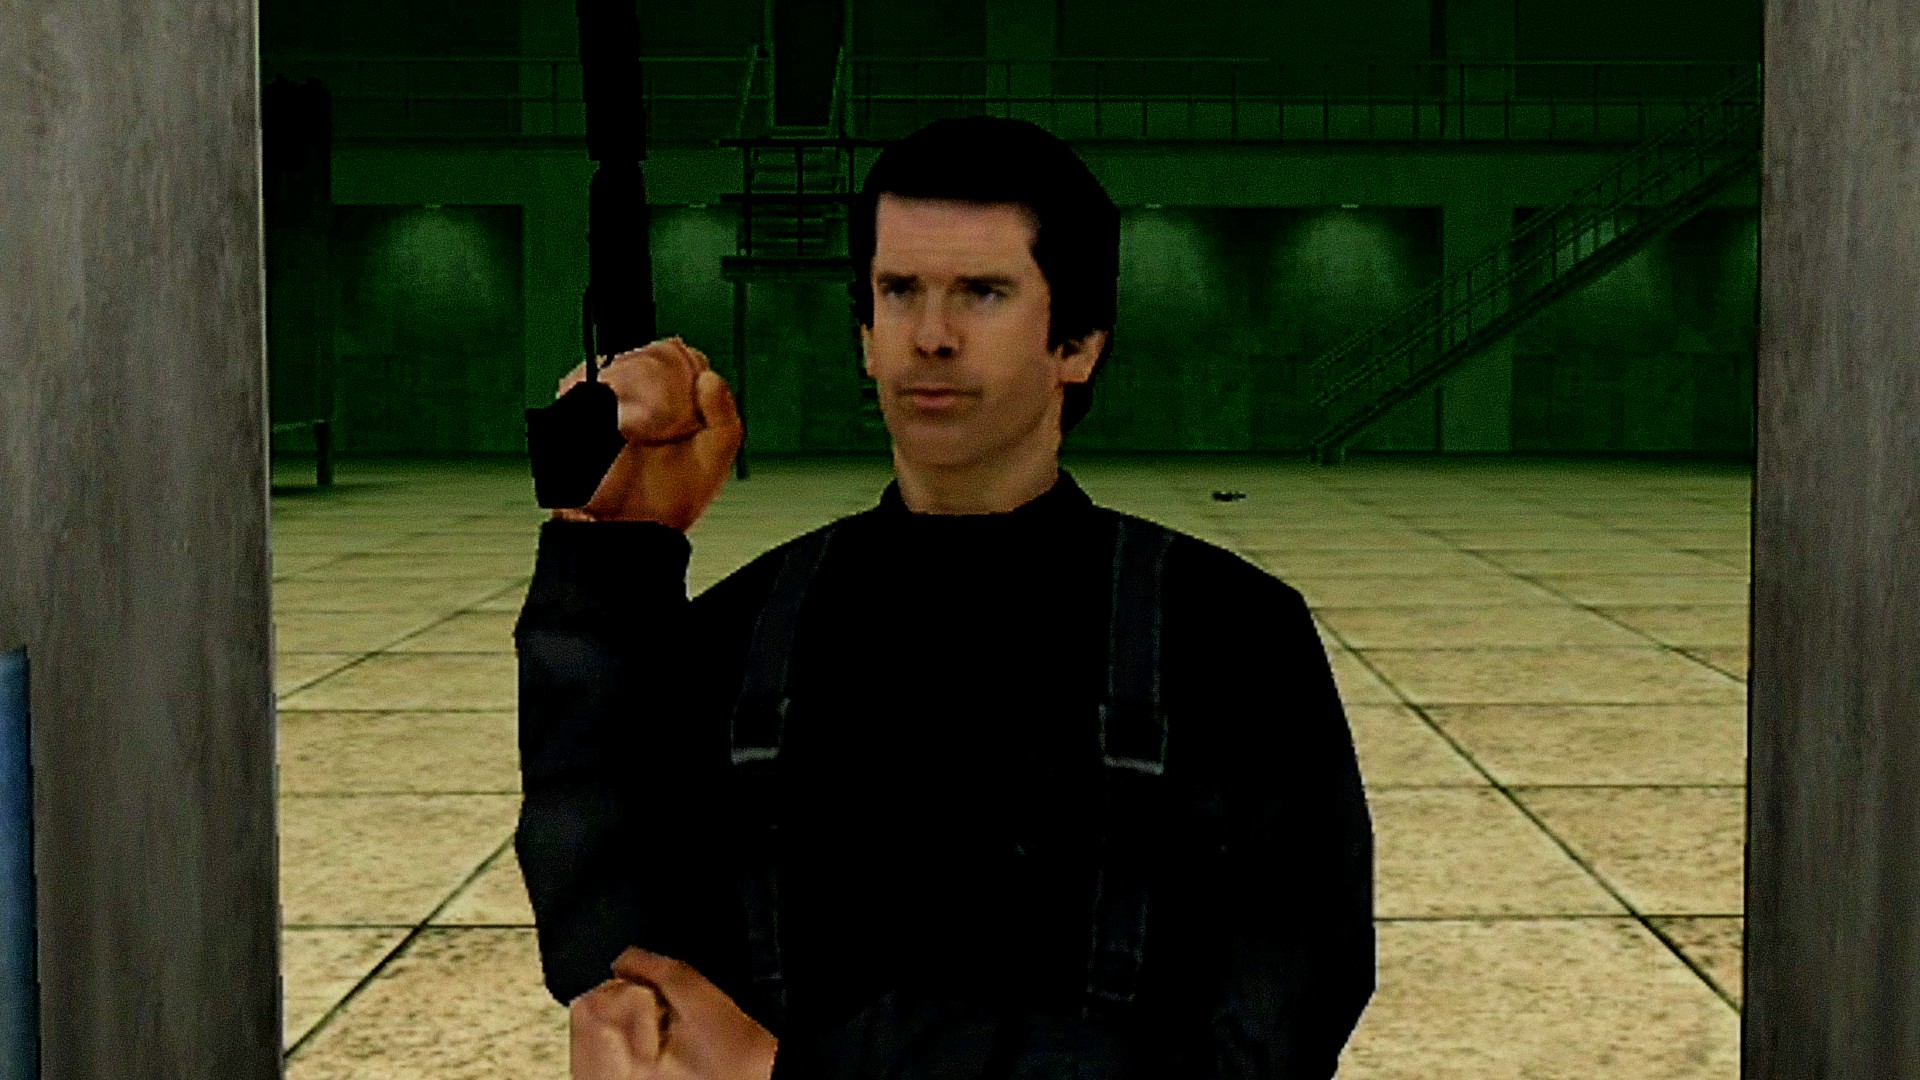 GoldenEye 007 is coming to Xbox Game Pass with 4K resolution